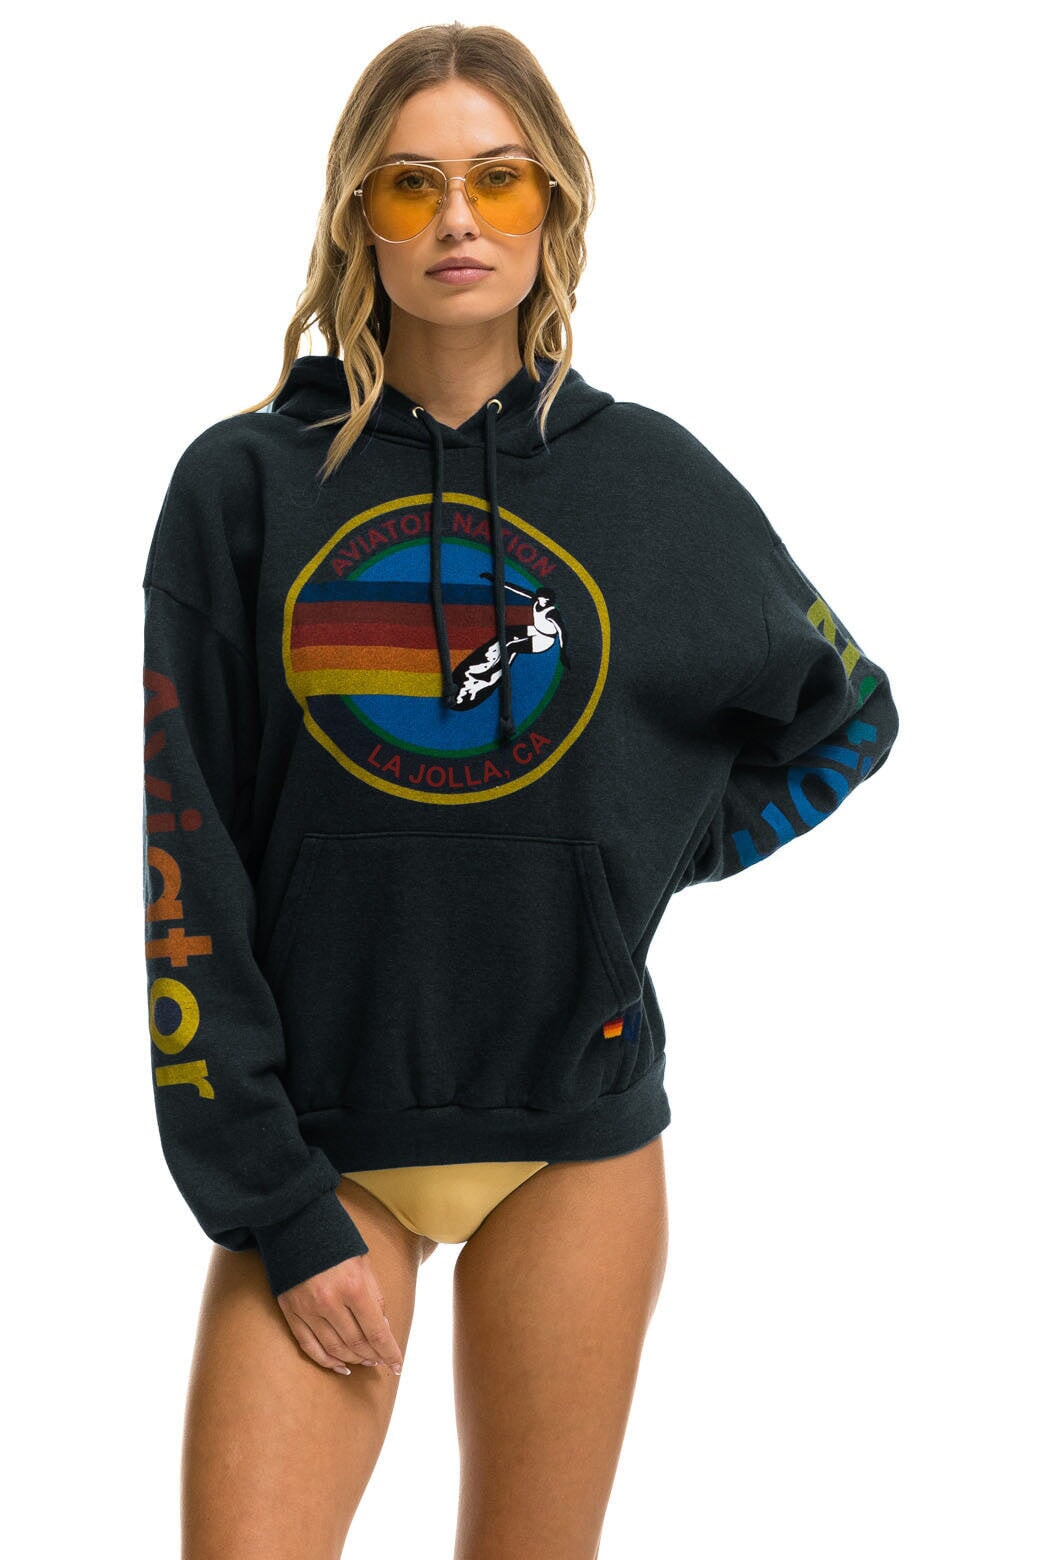 AVIATOR NATION LA JOLLA RELAXED PULLOVER HOODIE - CHARCOAL Hoodie Aviator Nation 